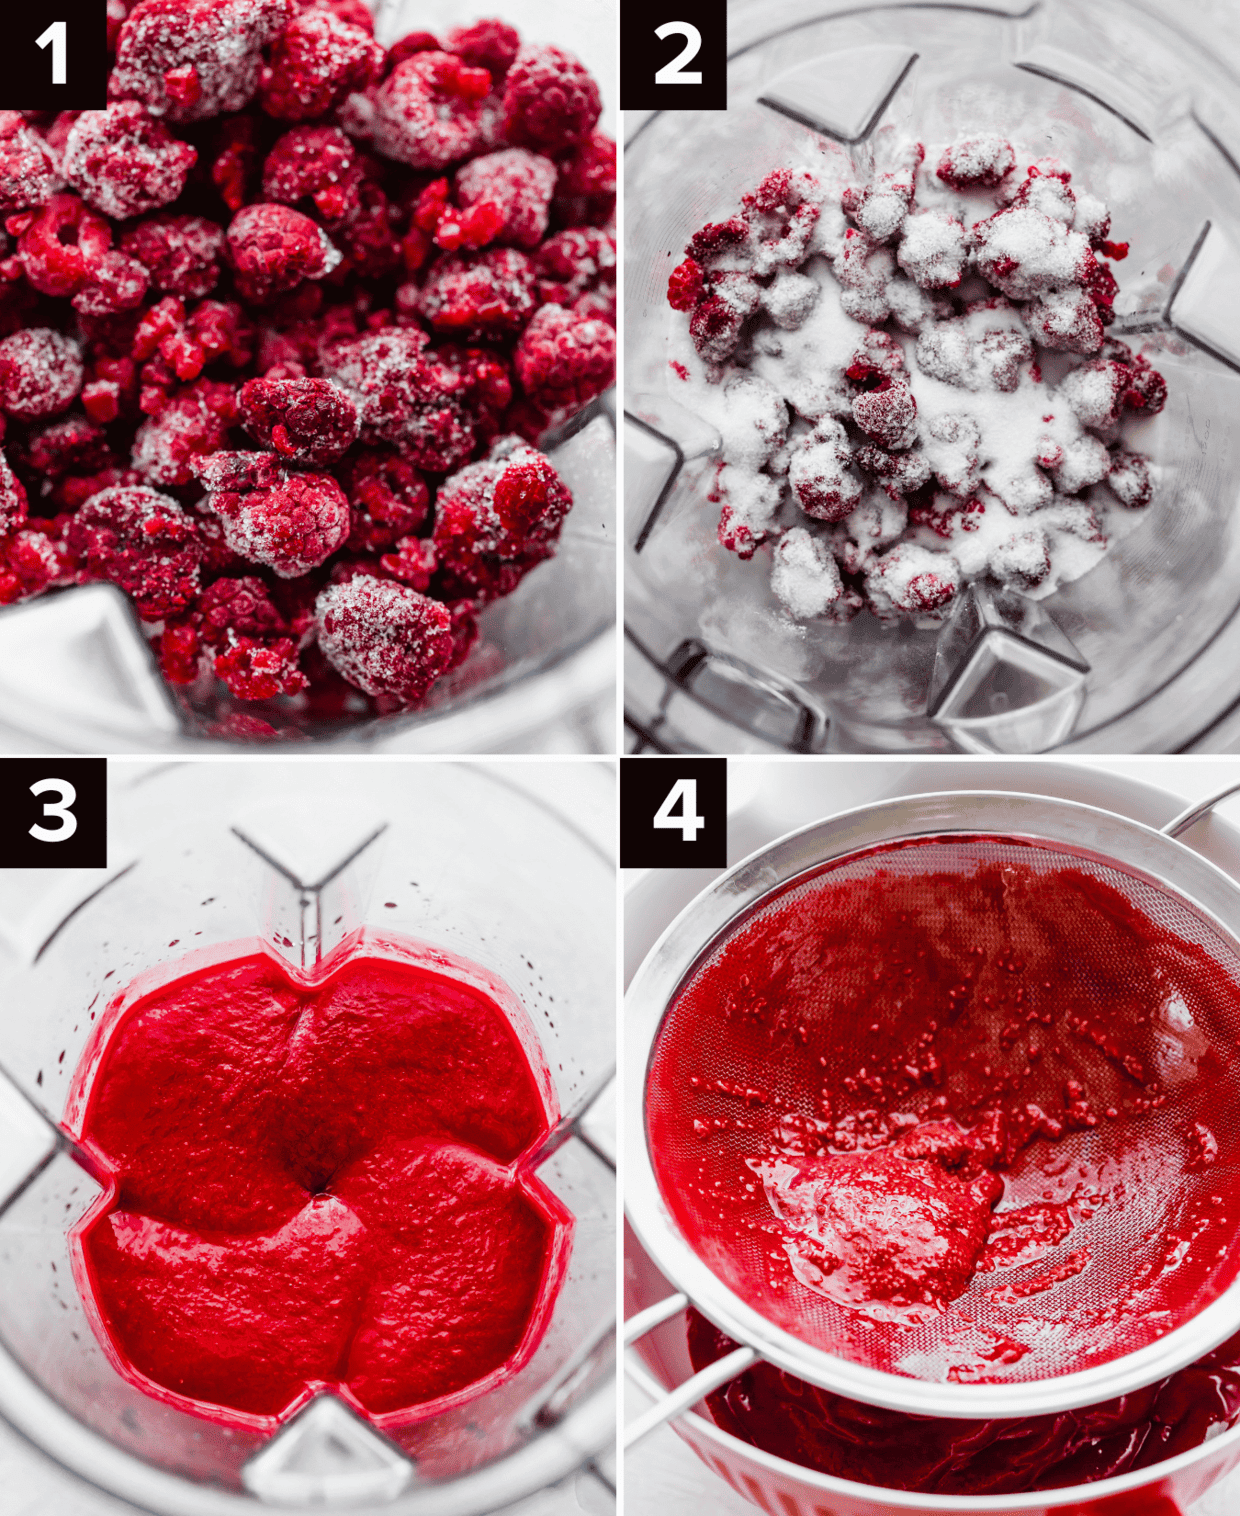 Four images showing how to make Raspberry Sorbet using corn syrup, a blender, and churning in ice cream maker.